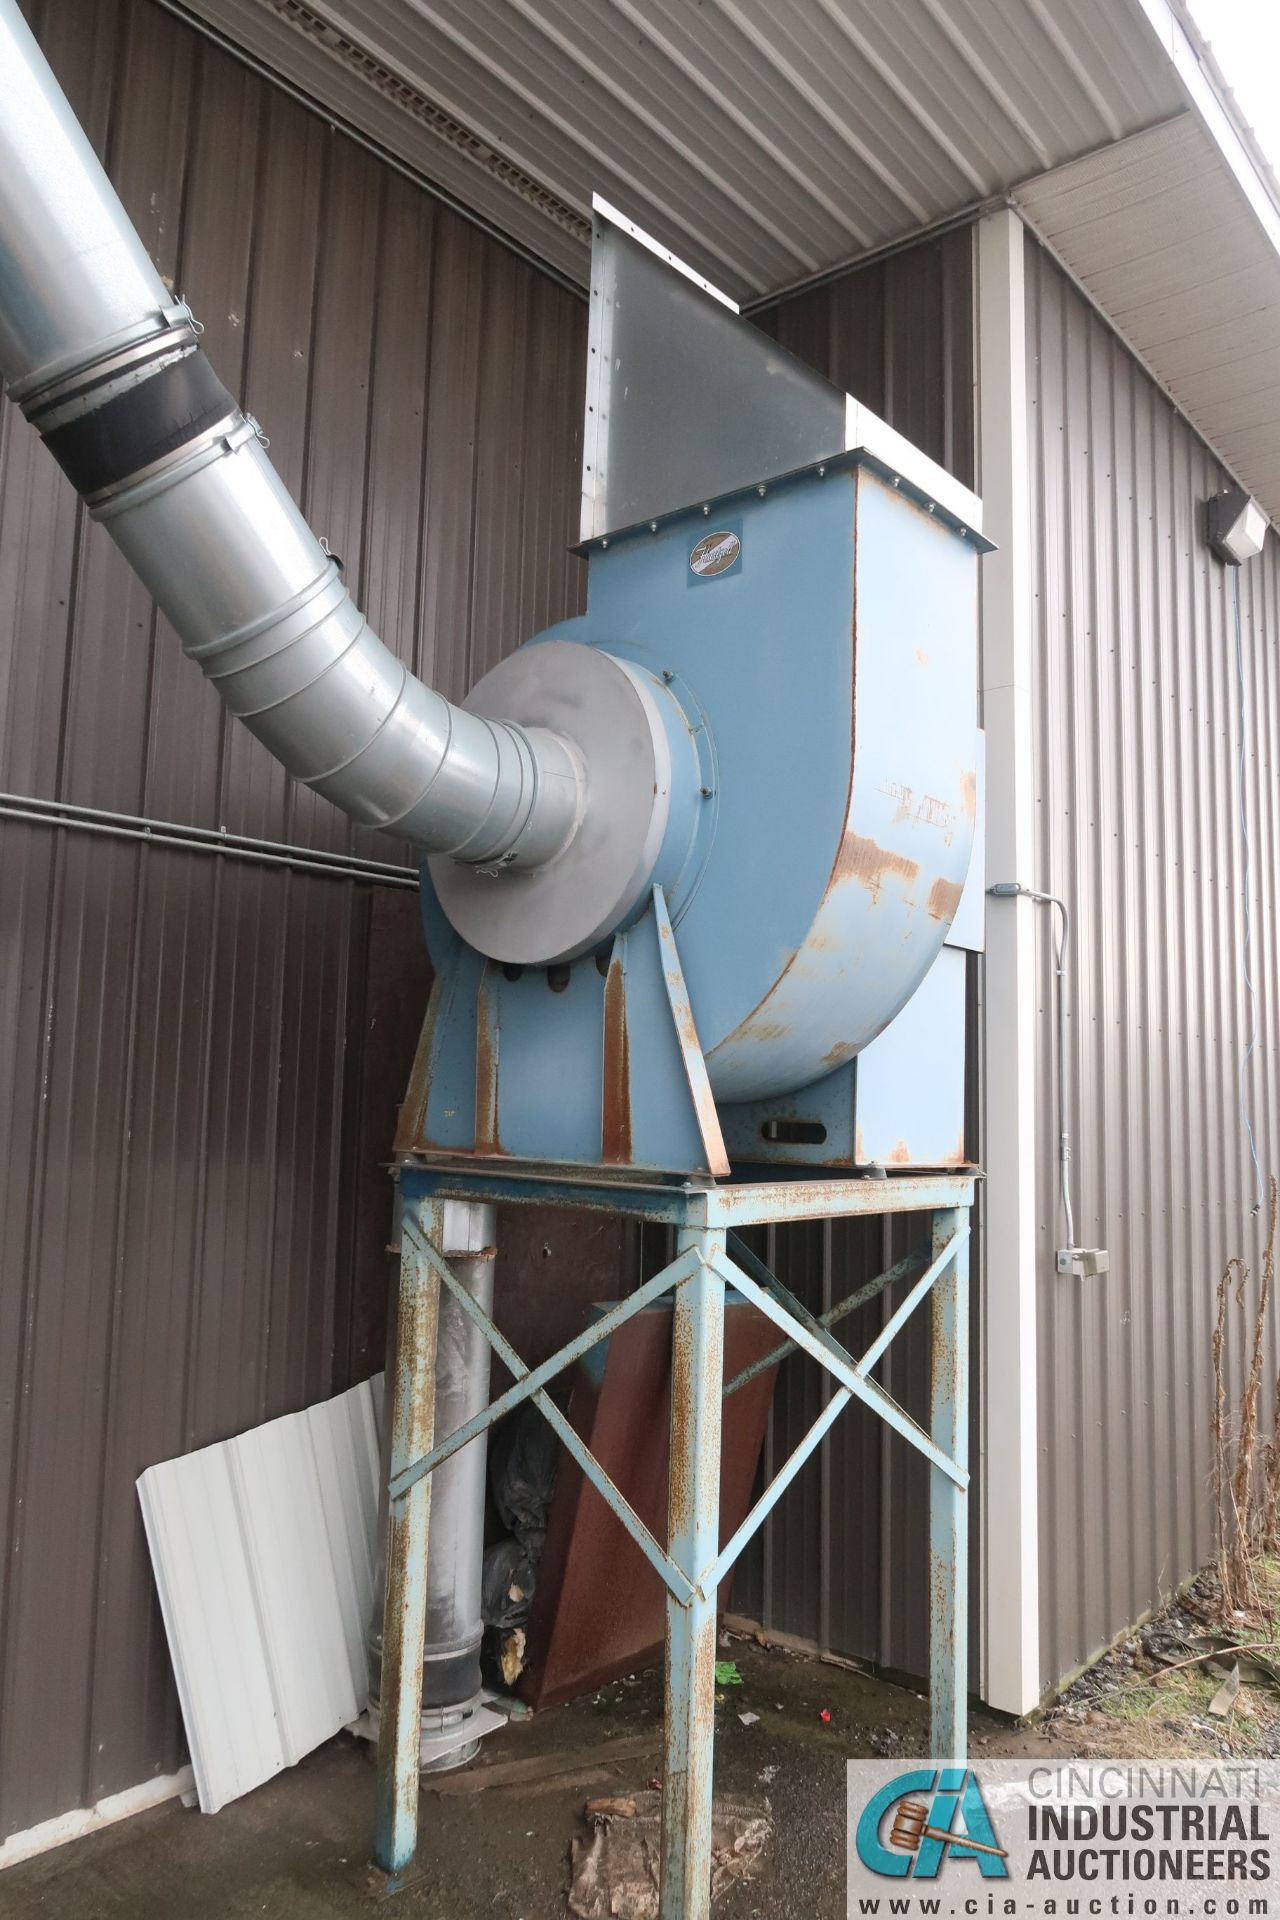 WHEELABOUT MODEL 57MOD36WCC DUST COLLECTOR; S/N ....7095 WITH HARTZELL FAN UNIT - Image 3 of 5